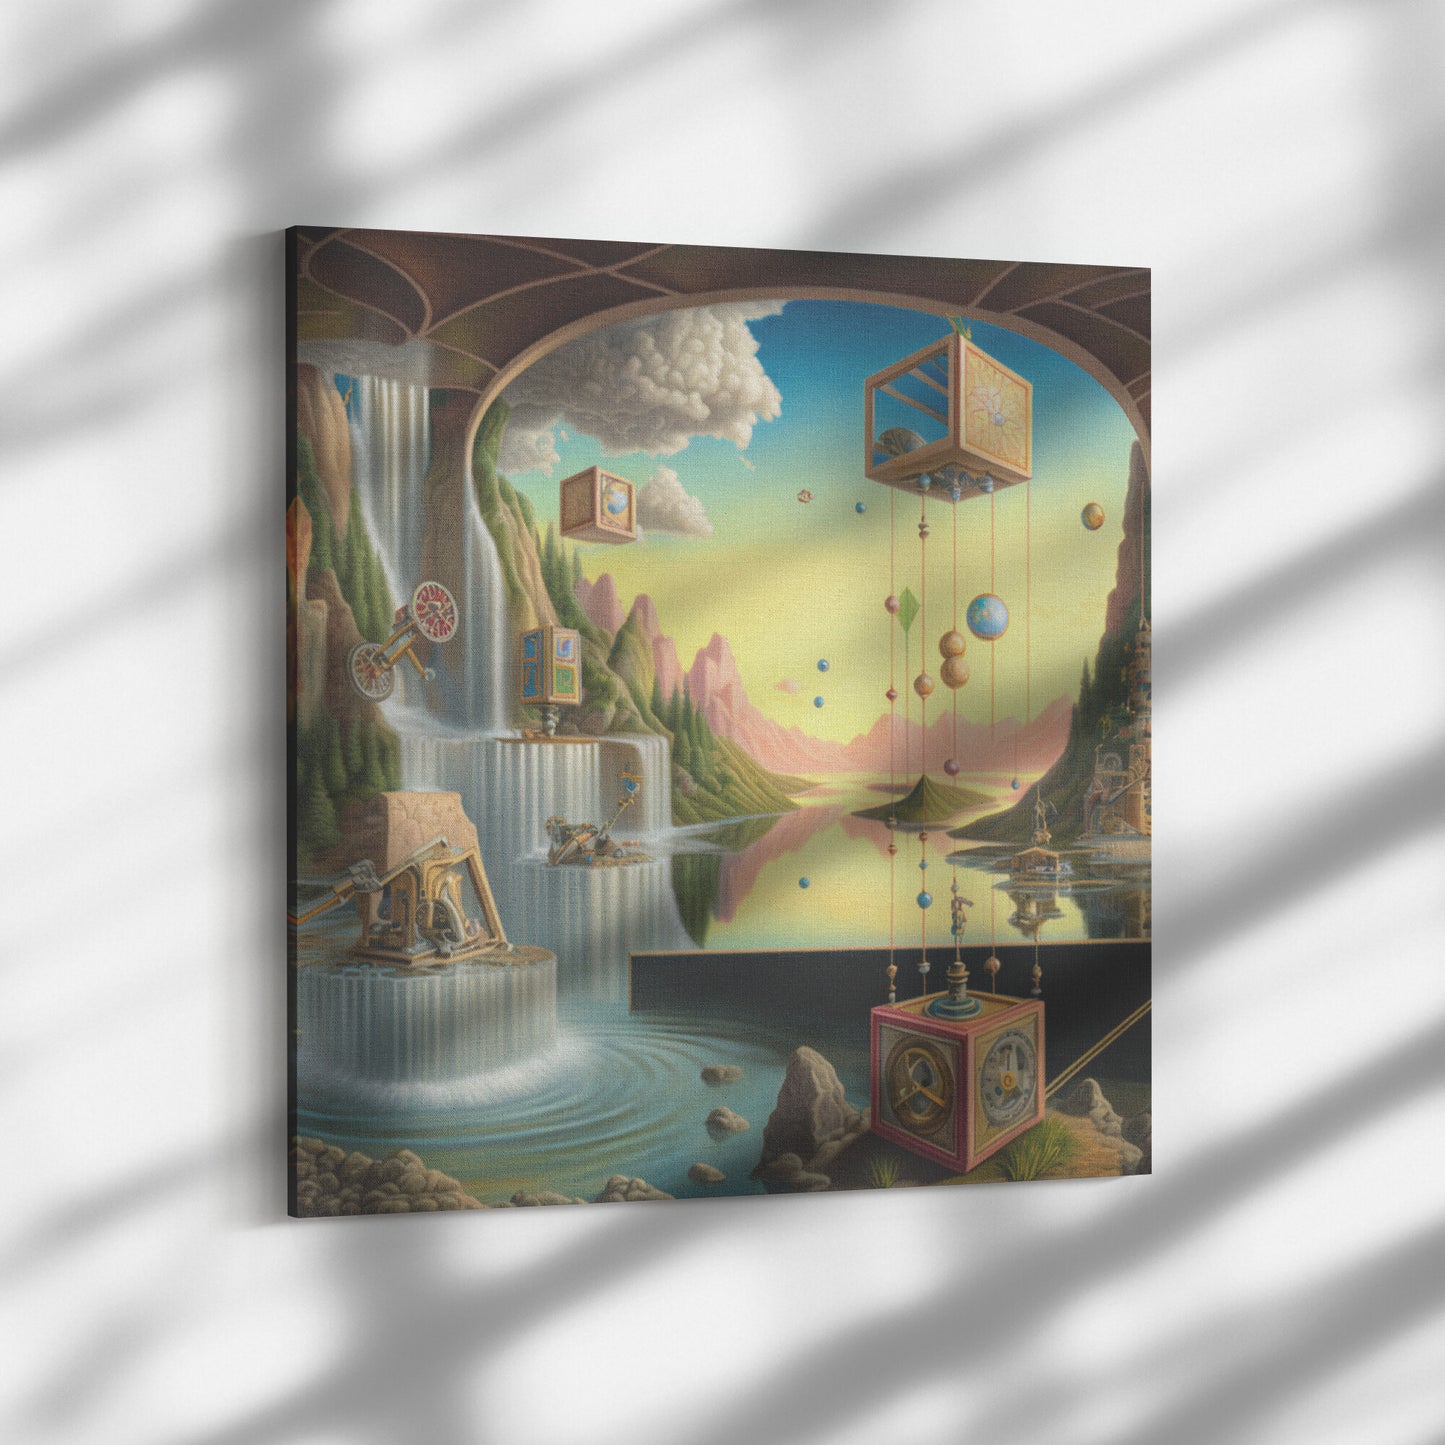 Surrealist Painting in Style of Salvador Dail, Surrealistic Steampunk Art, Midjourney AI Art